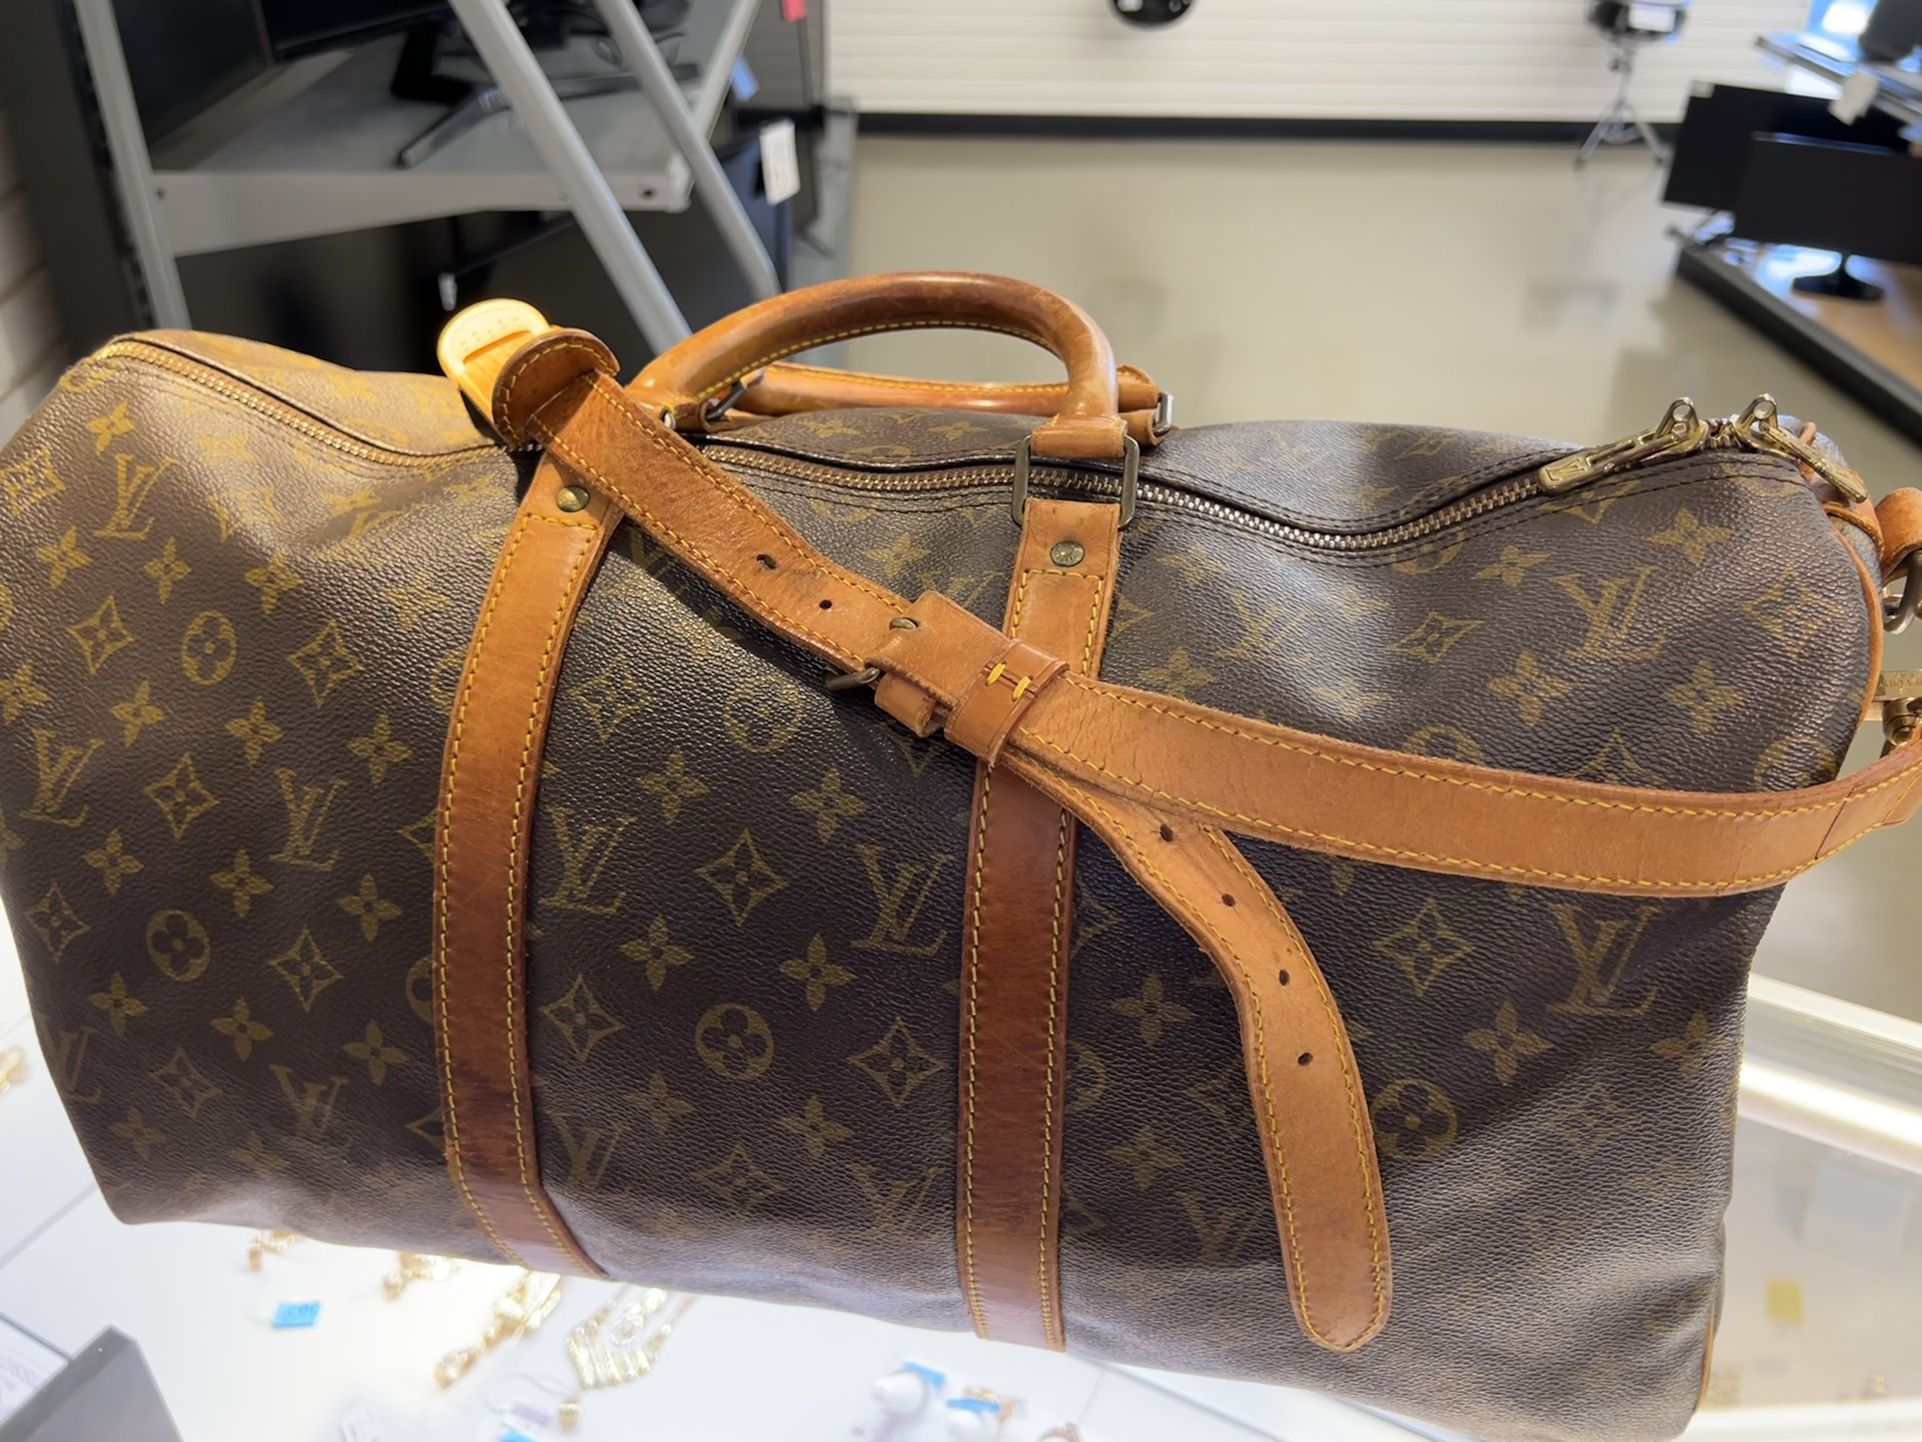 Which Louis Vuitton Bag To Wear During The Summer?